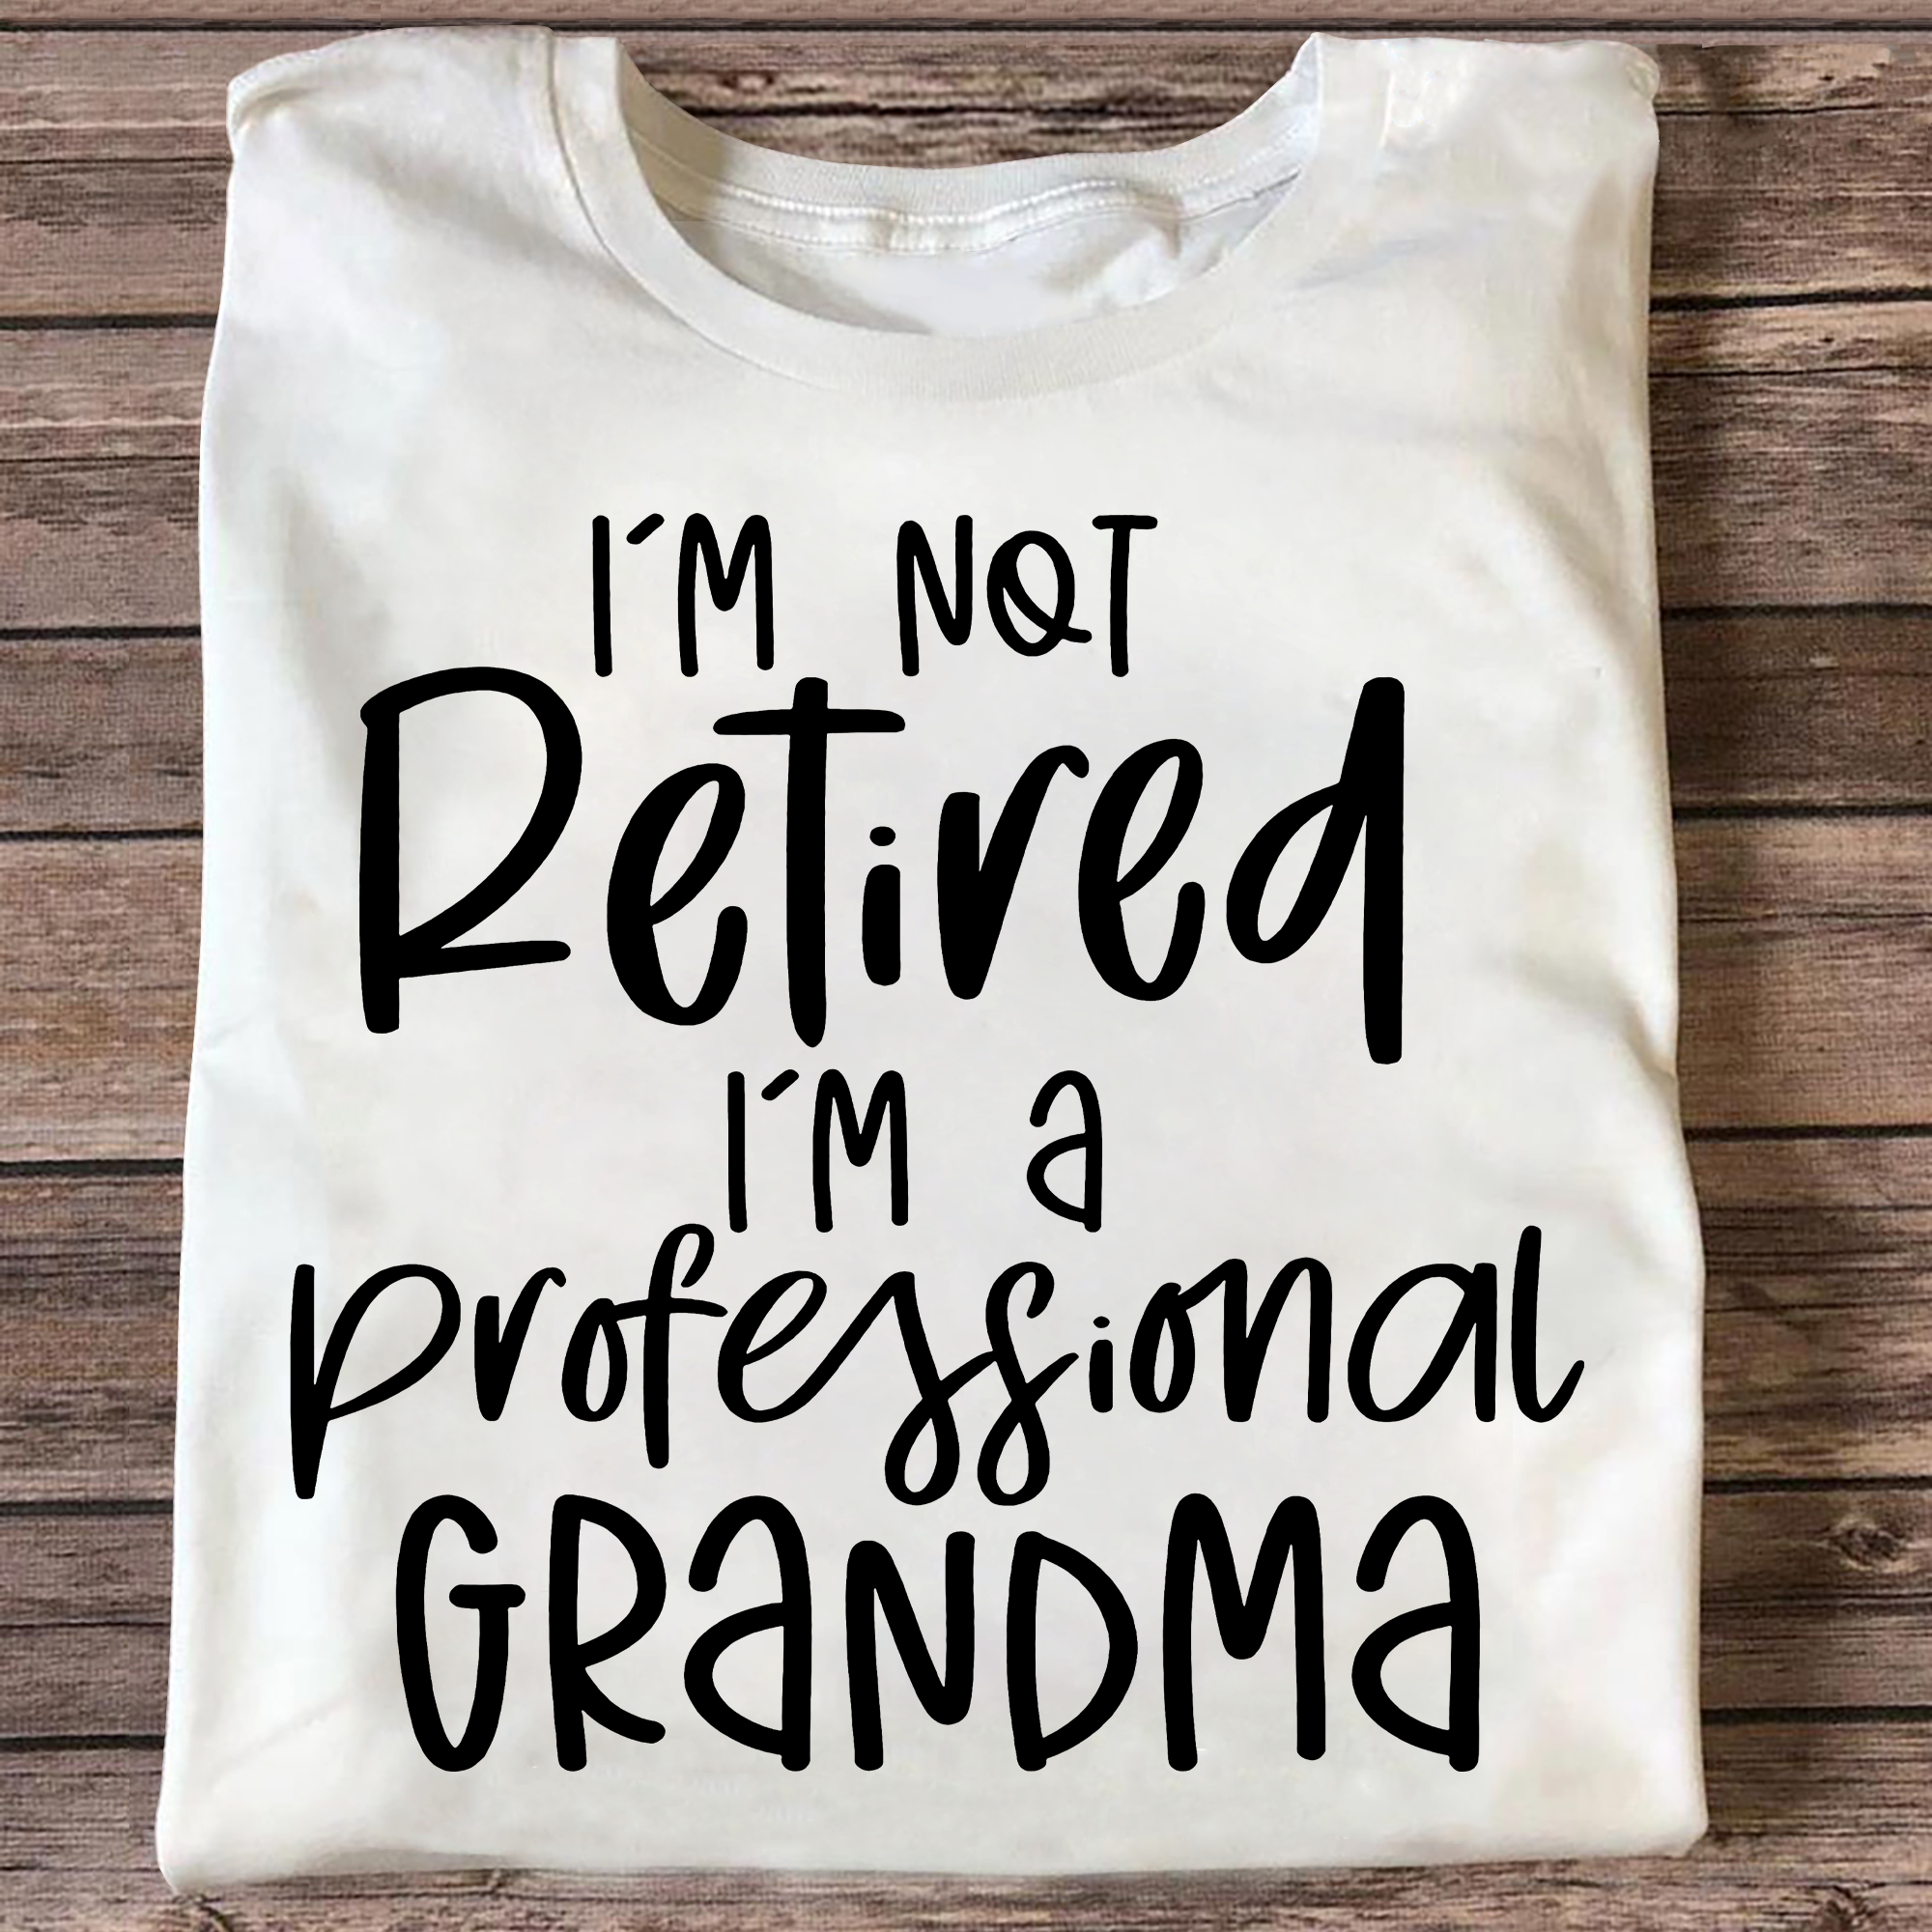 I'm Not Retired I'm A Professional Grandpa Engraved Father's Day